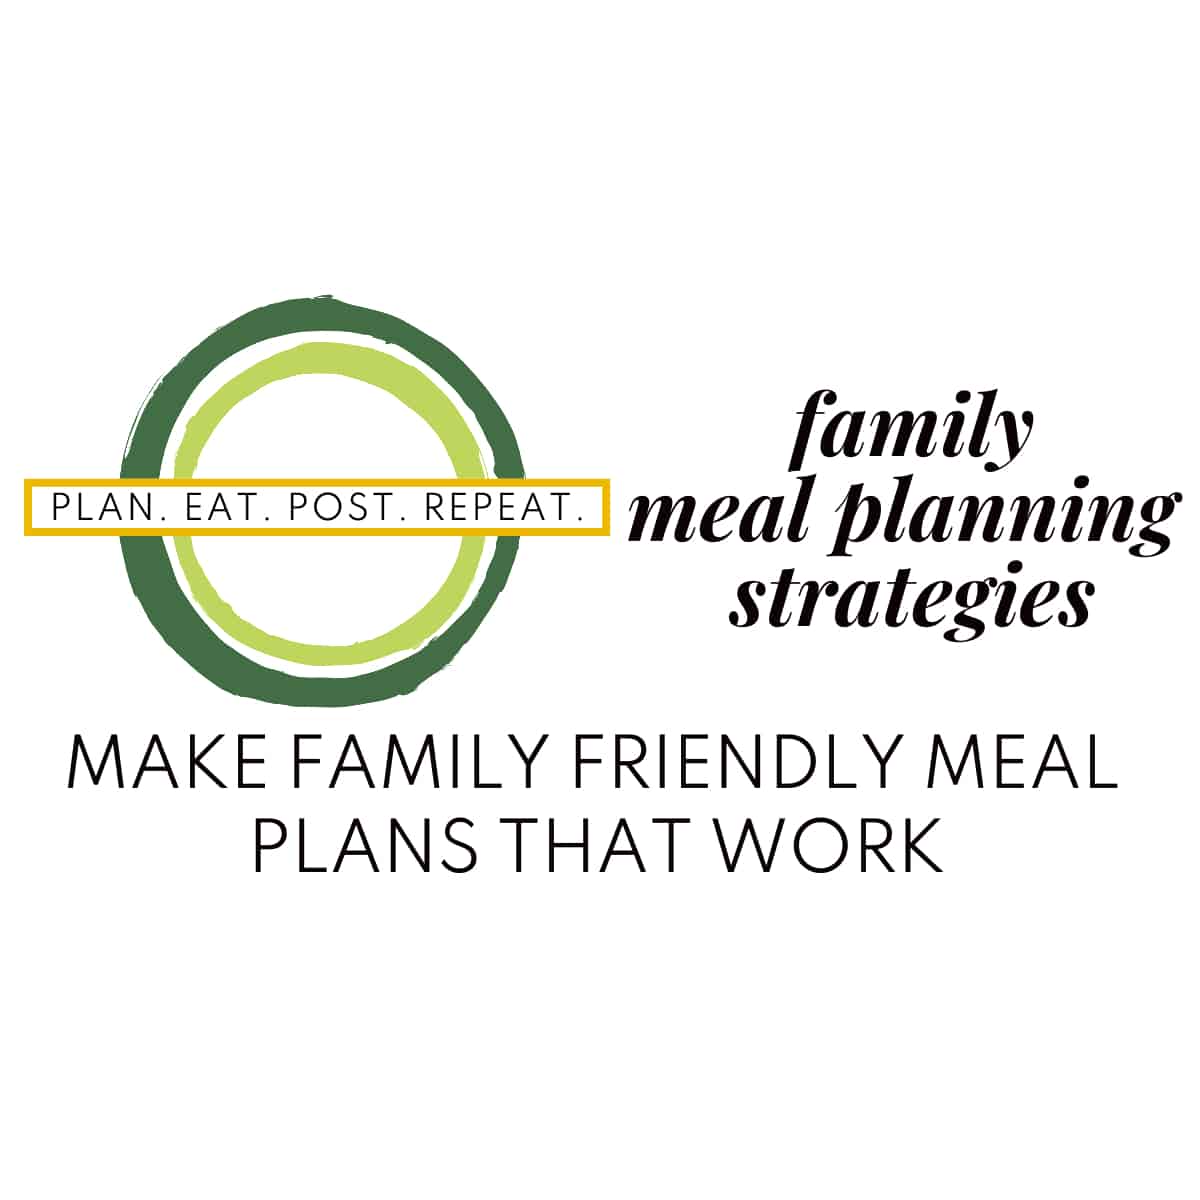 The Plan. Eat. Post. Repeat. logo next to the words, "family meal planning strategies" with the phrase "make family friendly meal plans that work" below.